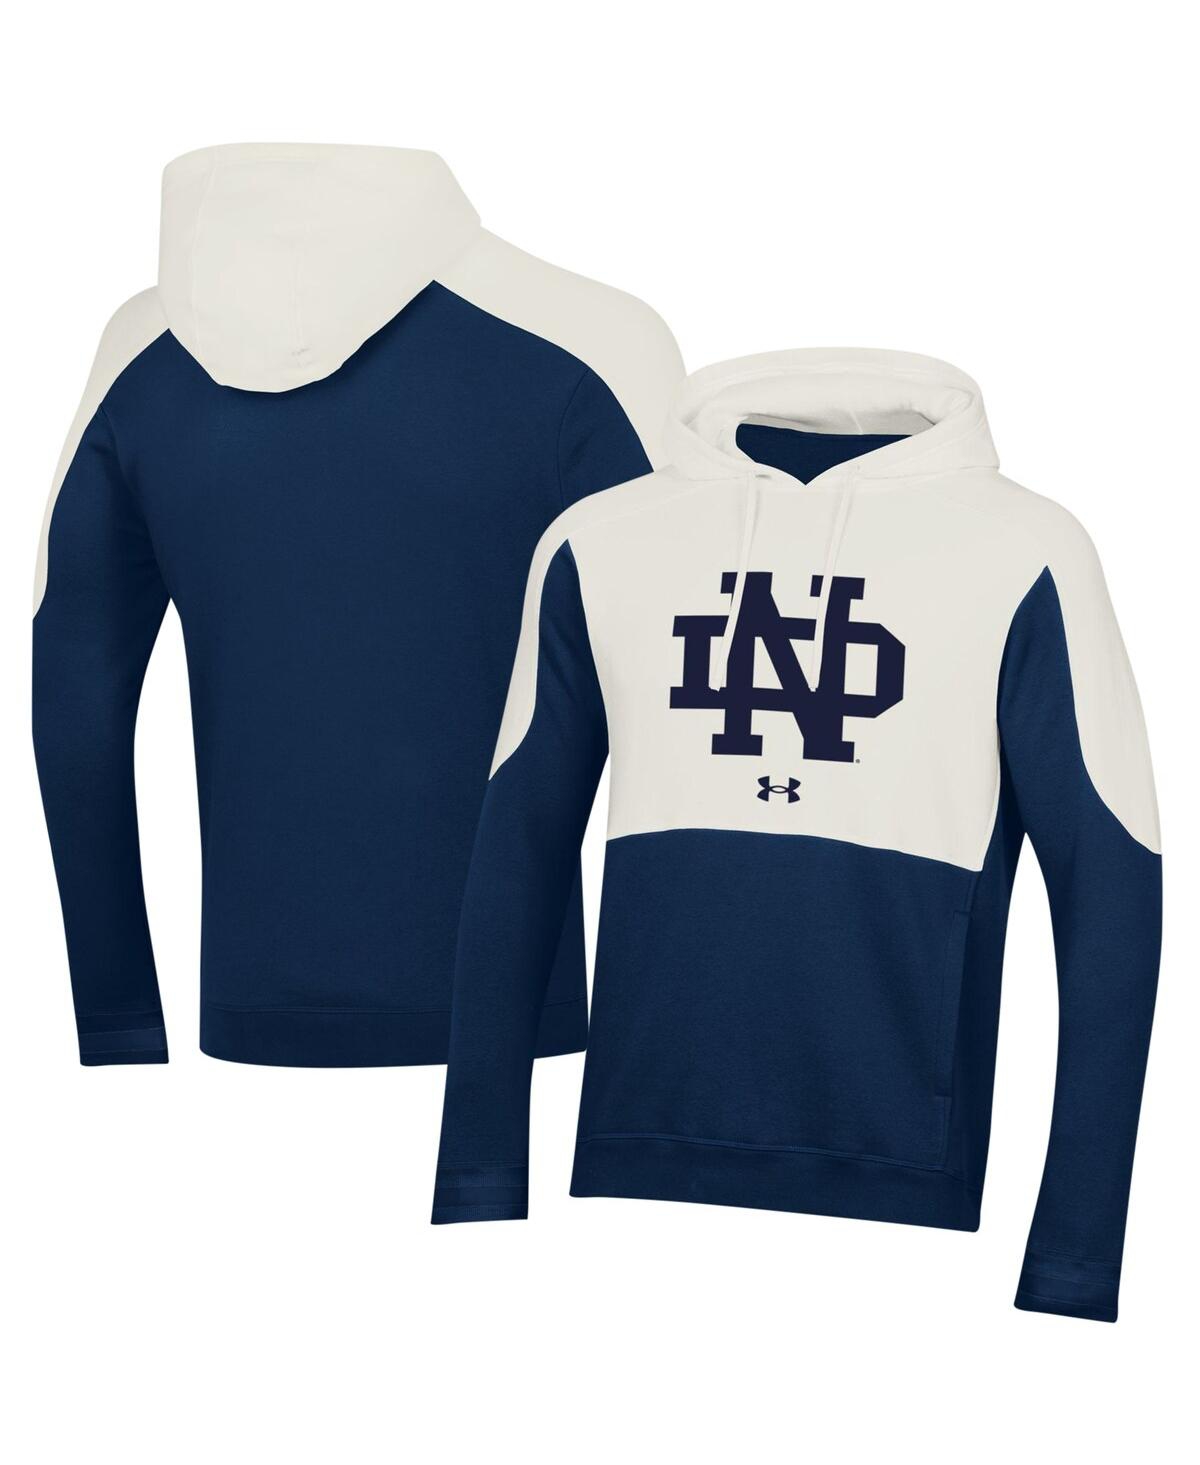 Under Armour Men's  Navy Notre Dame Fighting Irish Iconic Pullover Hoodie